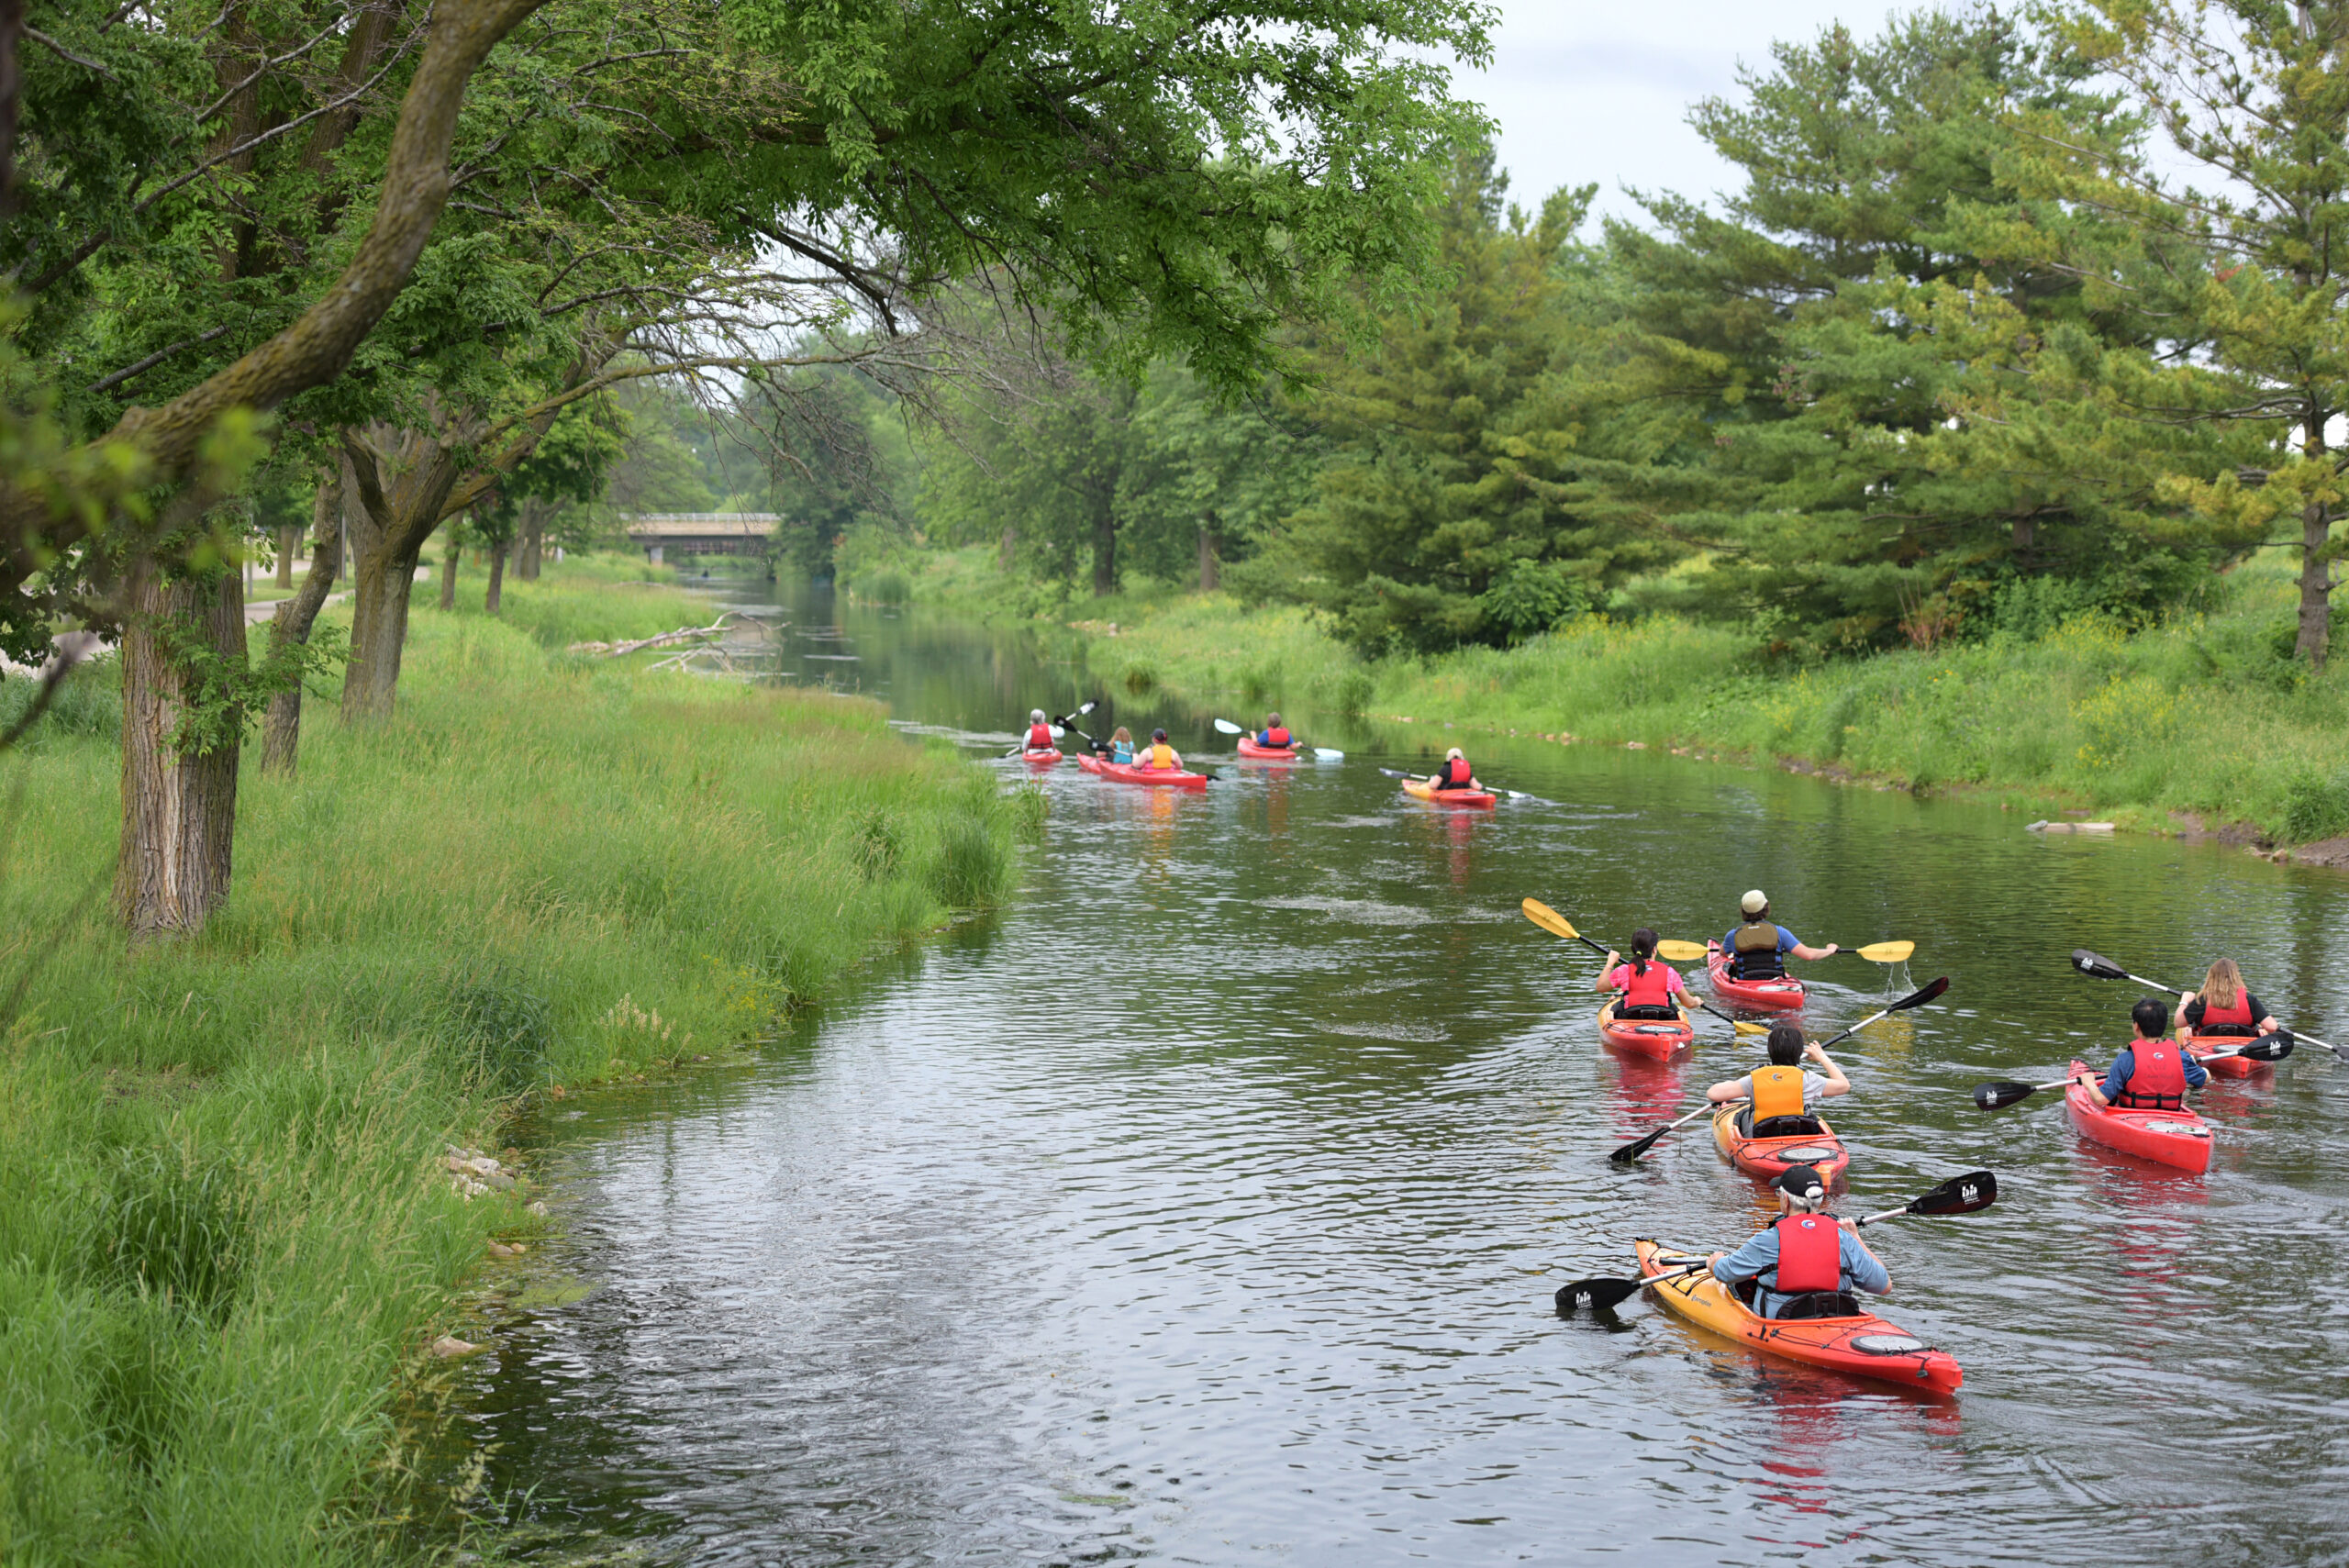 A large group of people kayaking down the Yahara river in Madison, WI